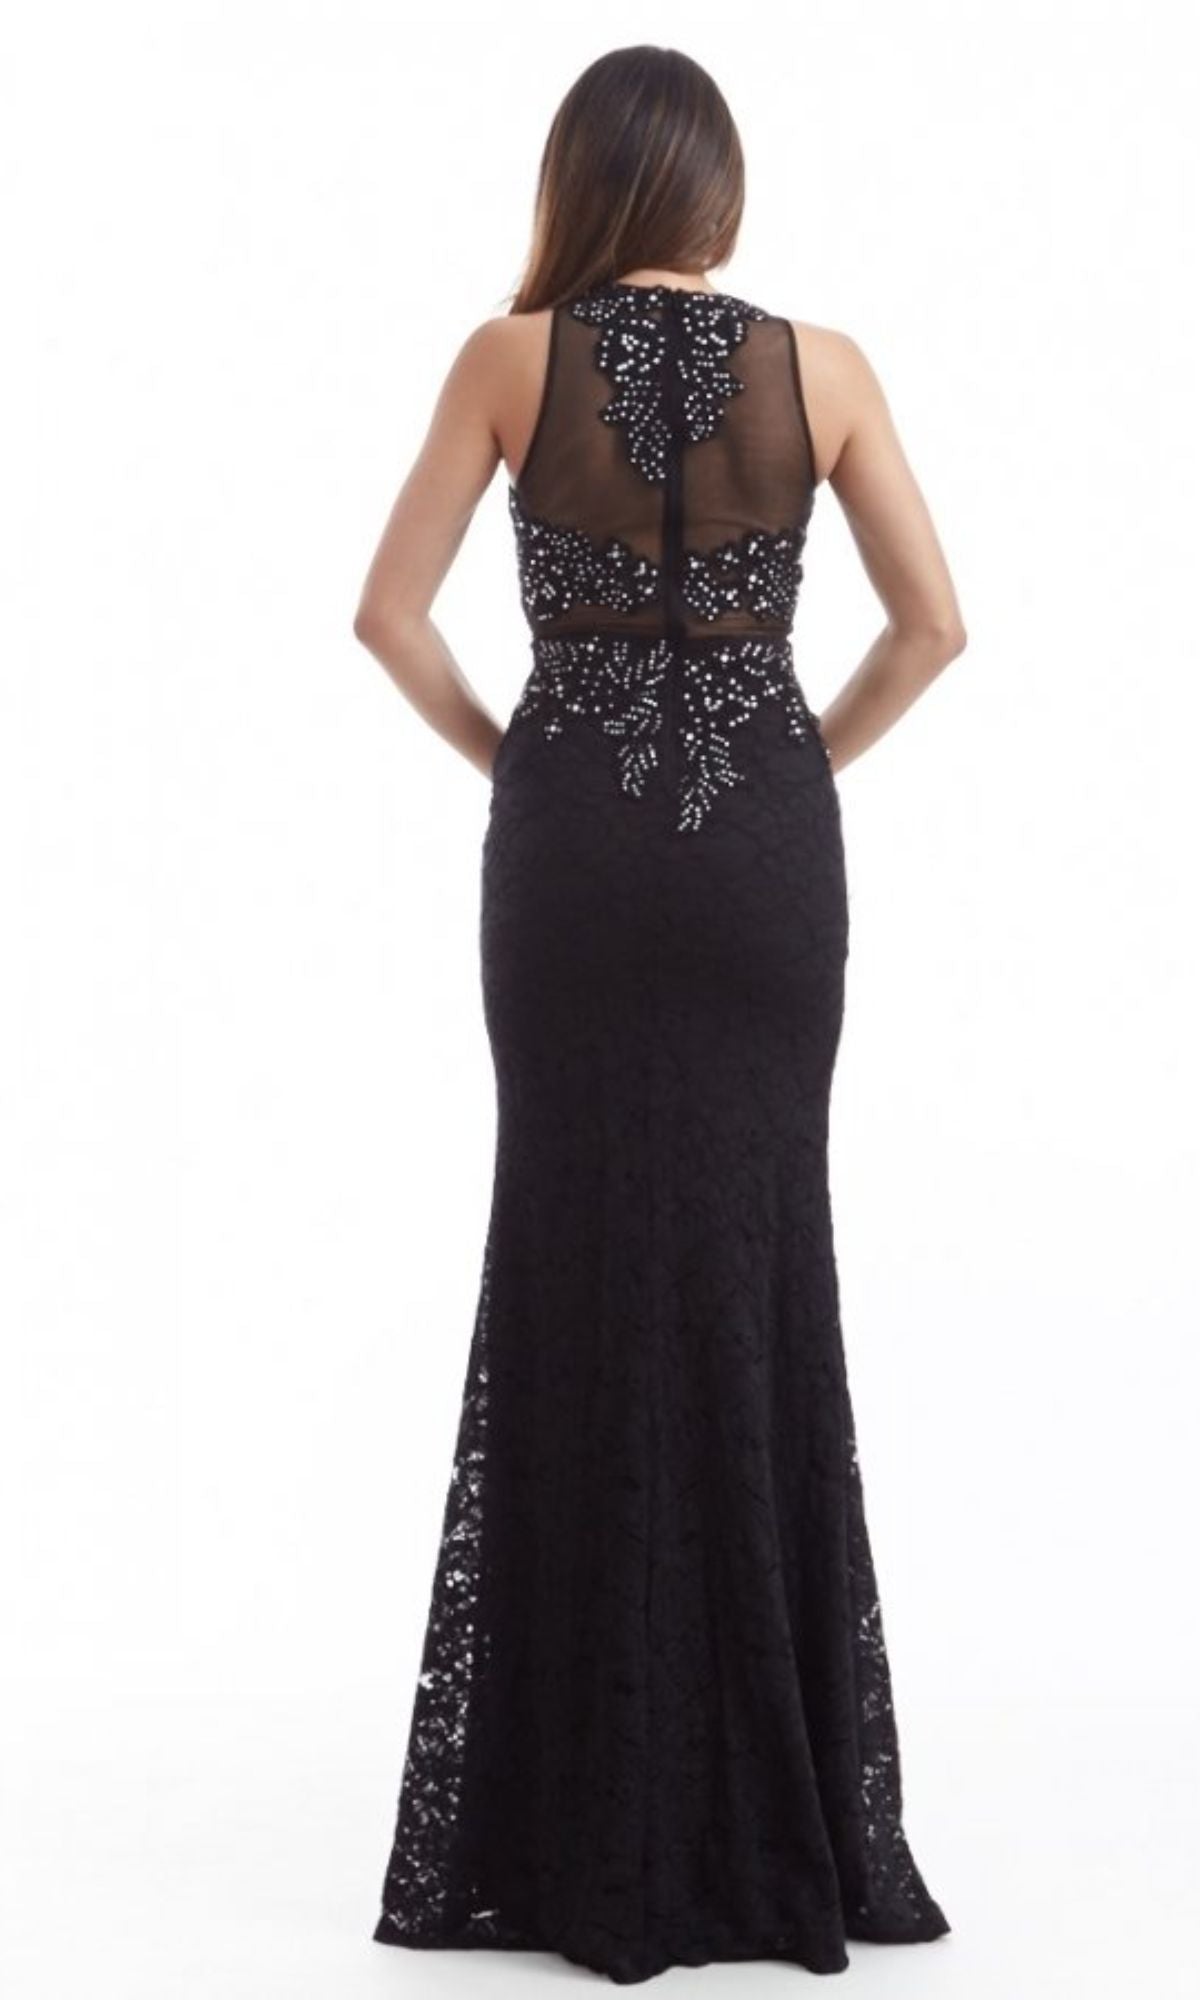 Long Prom Dress CR4225 by Chicas